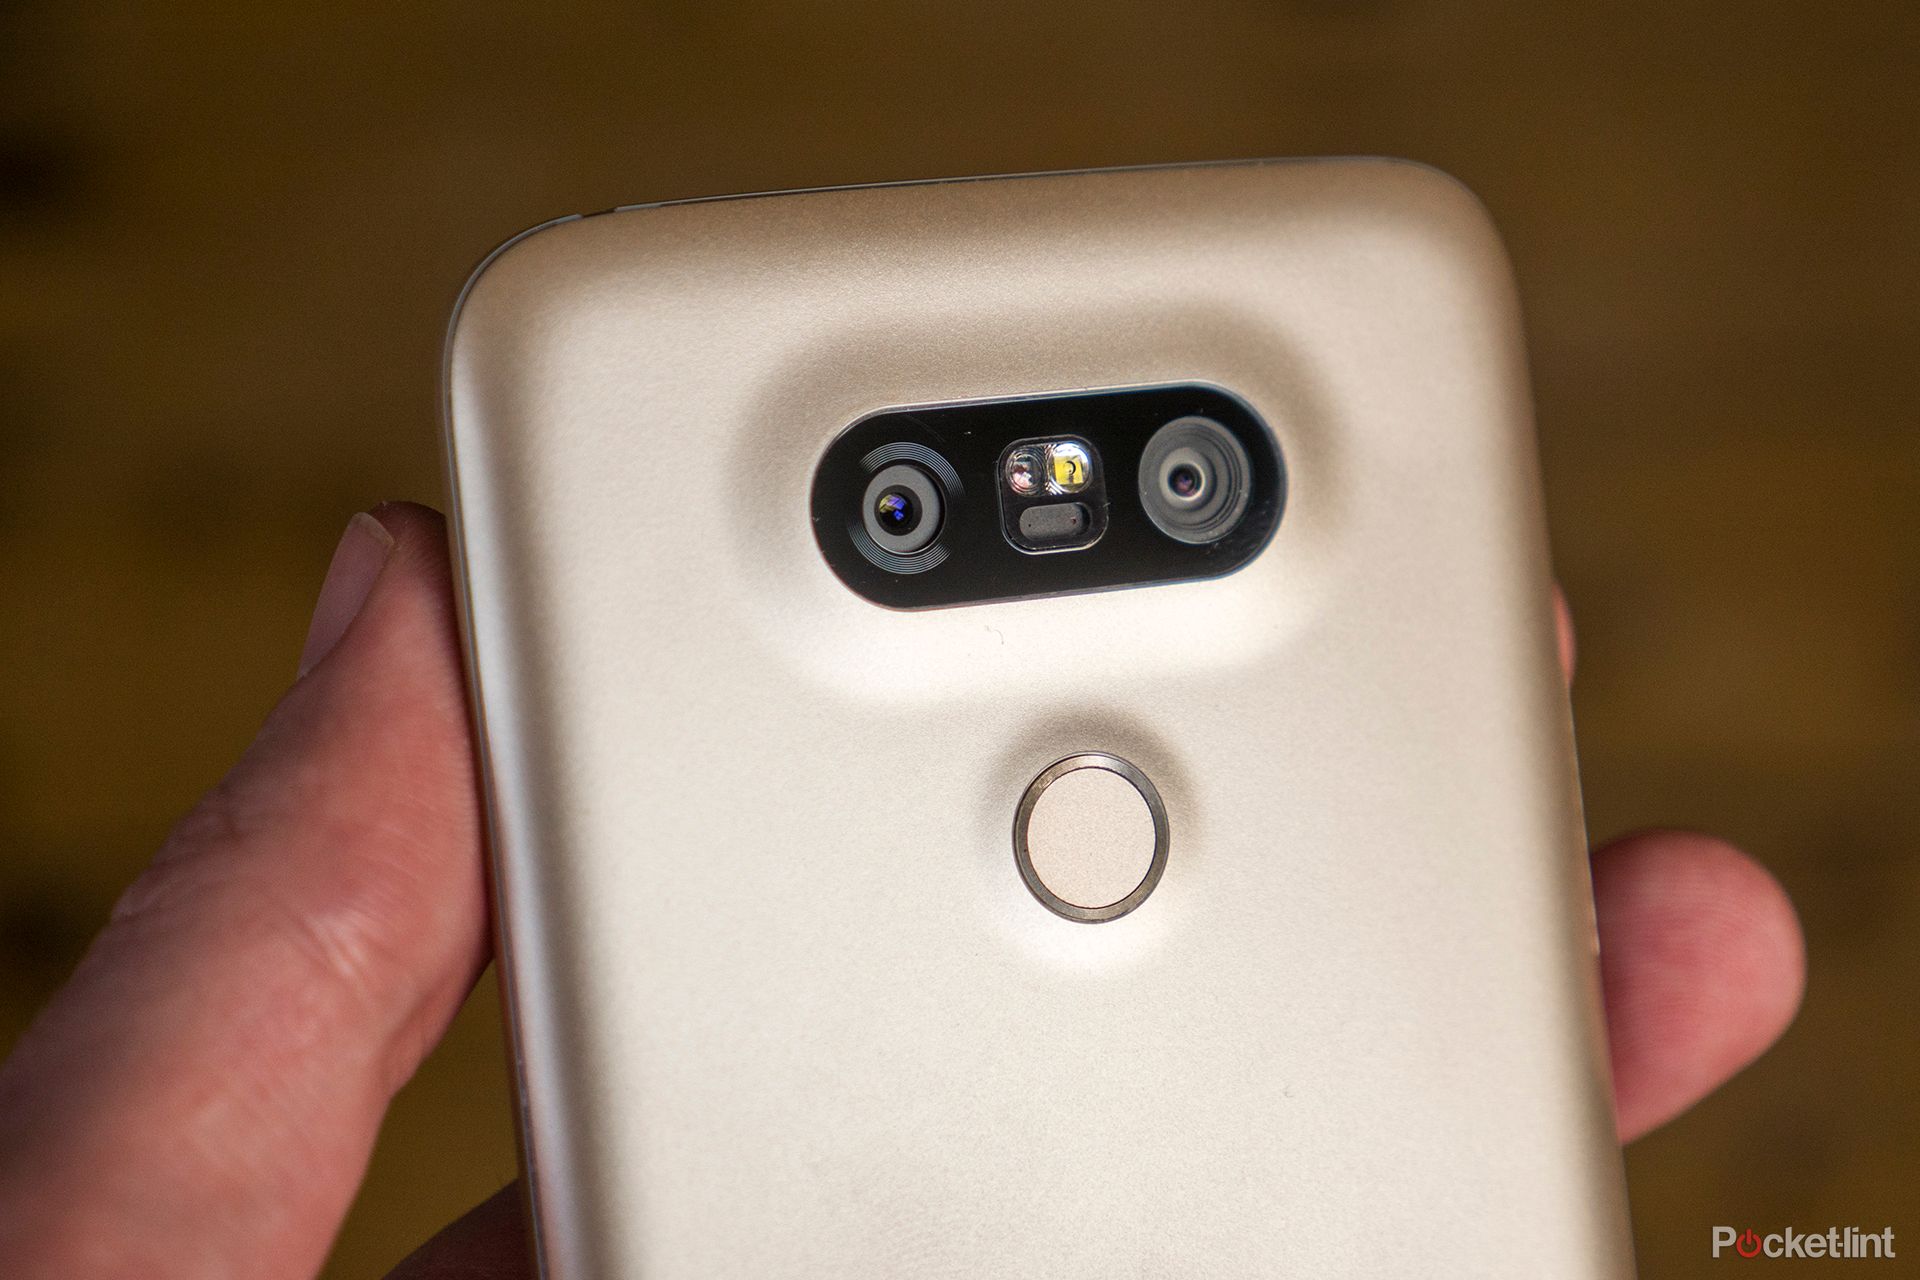 dual triple quad camera smartphones the history running through to the samsung galaxy s10 image 4